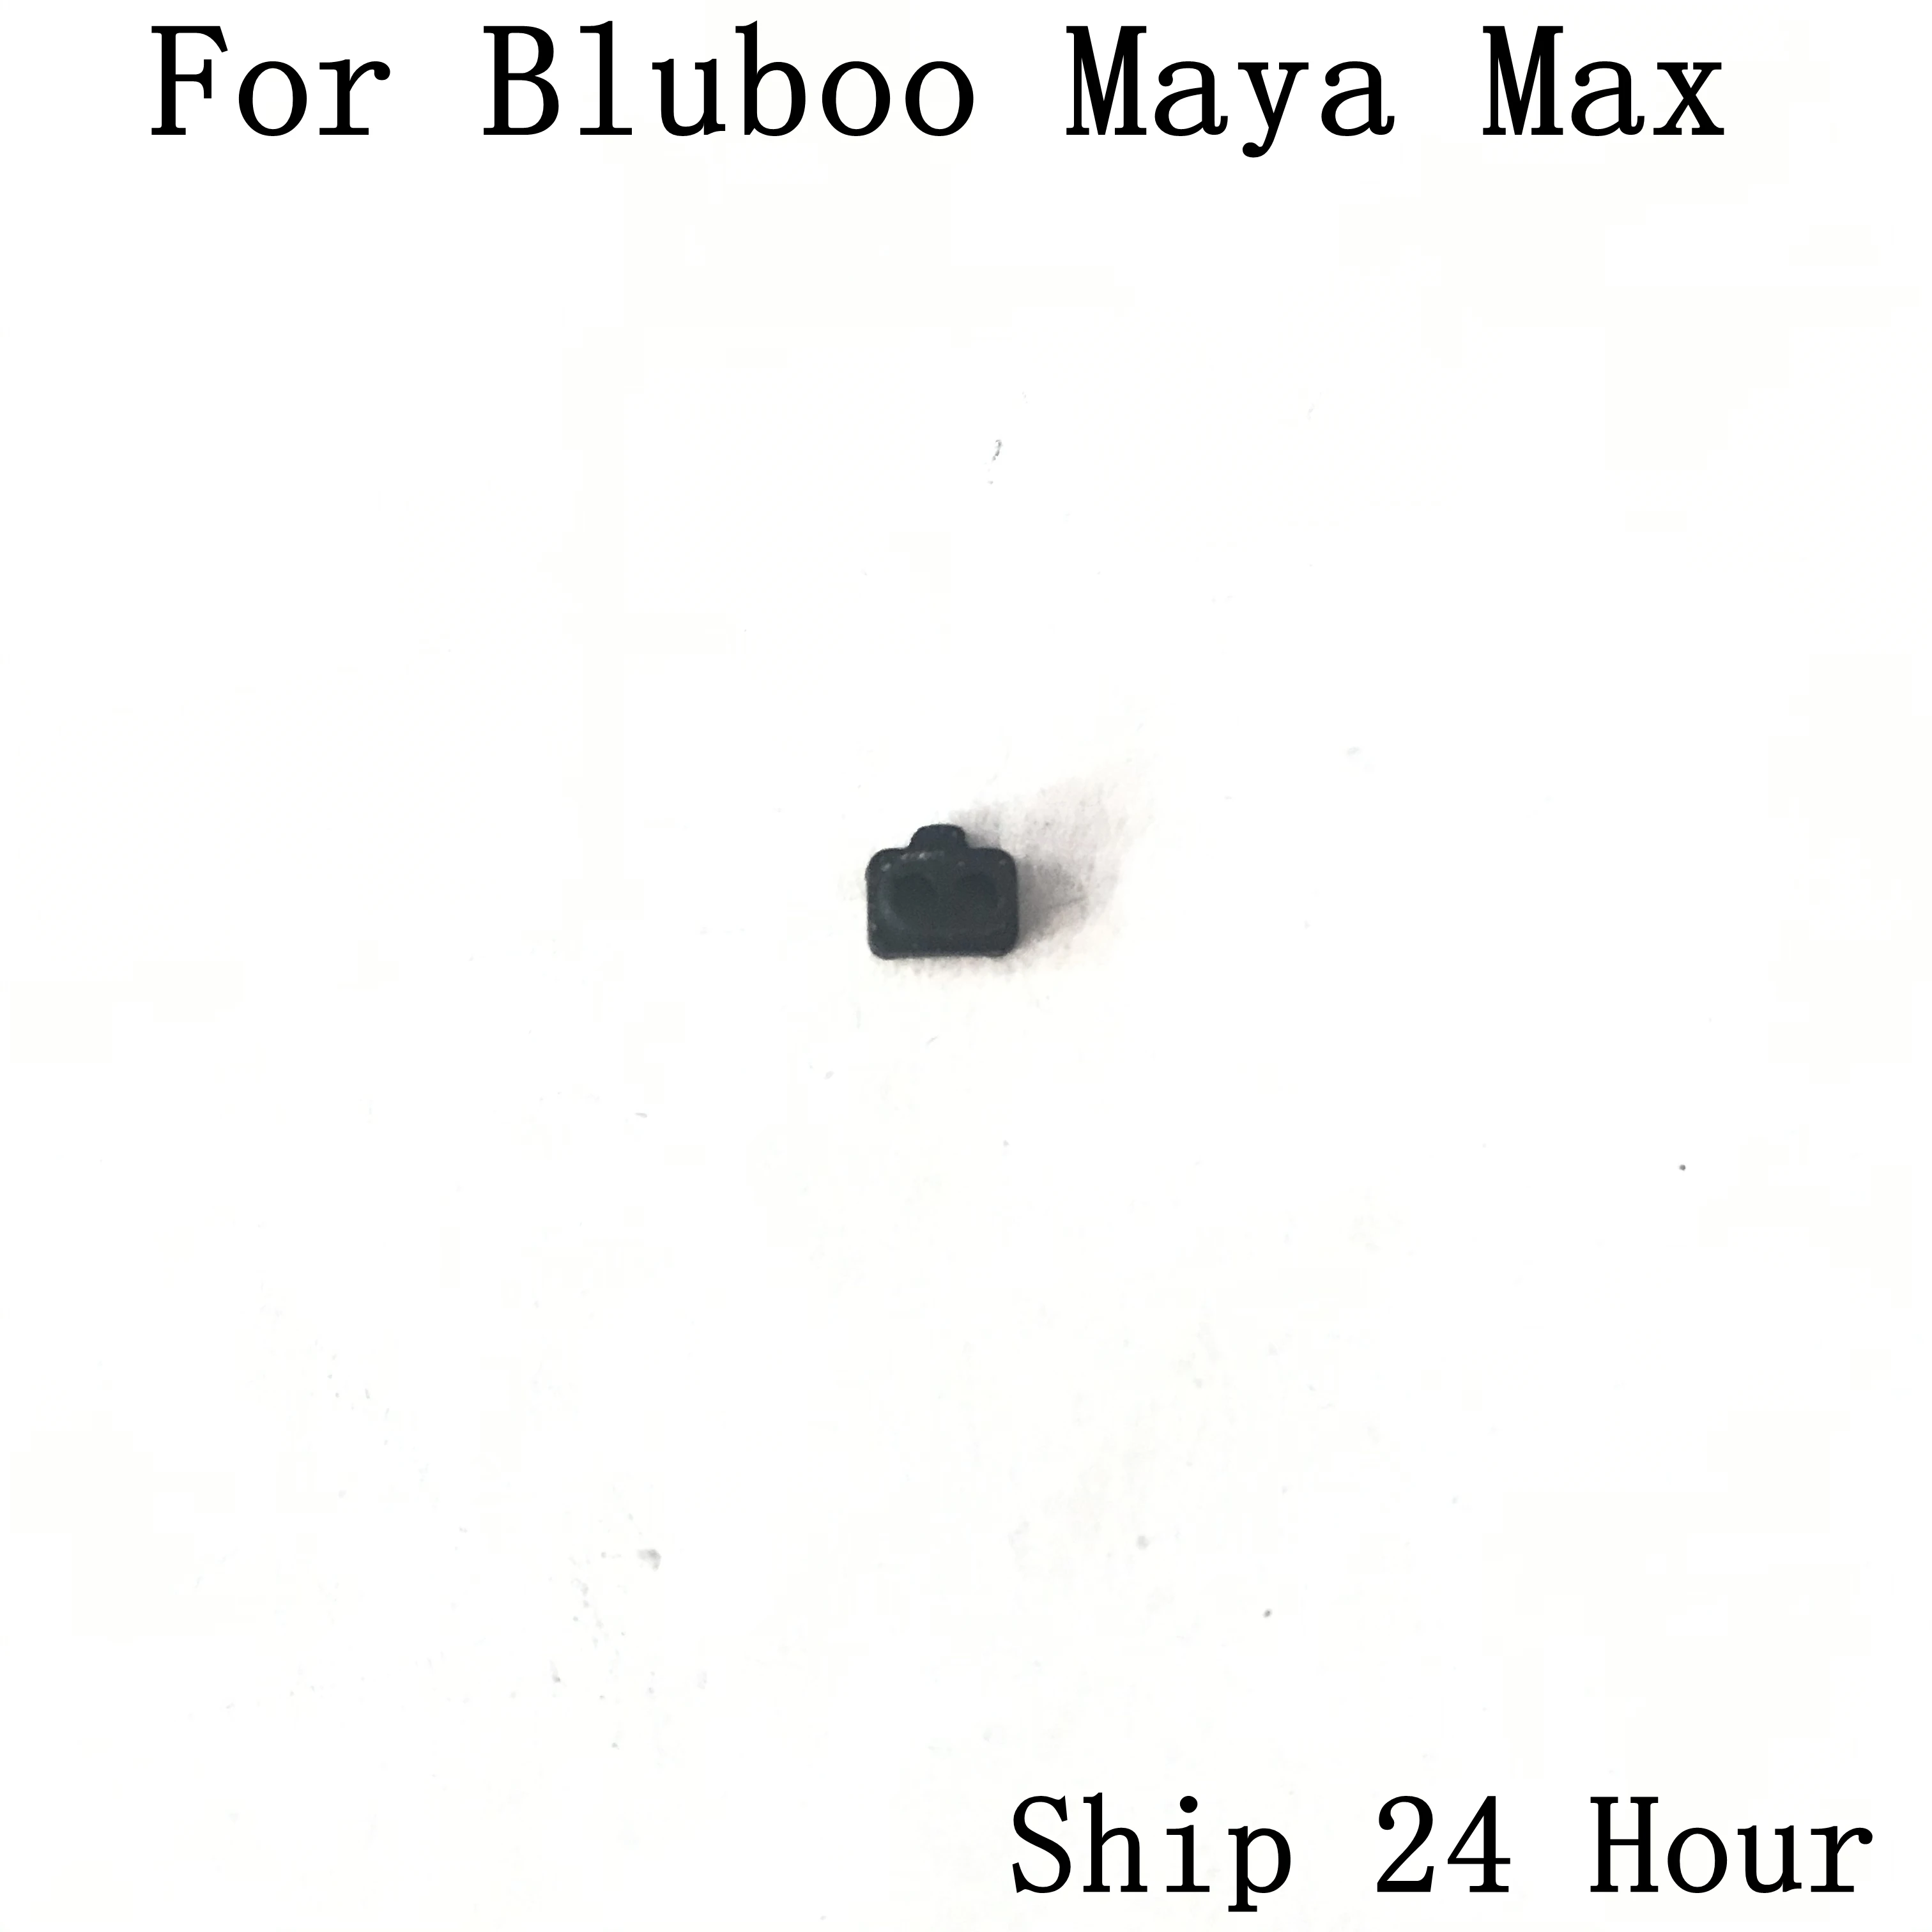 

Used Phone Proximately Sensor Rubber Sleeve For BLUBOO Maya Max MTK6750 Octa Core 6.0" HD 1280x720 + Tracking Number